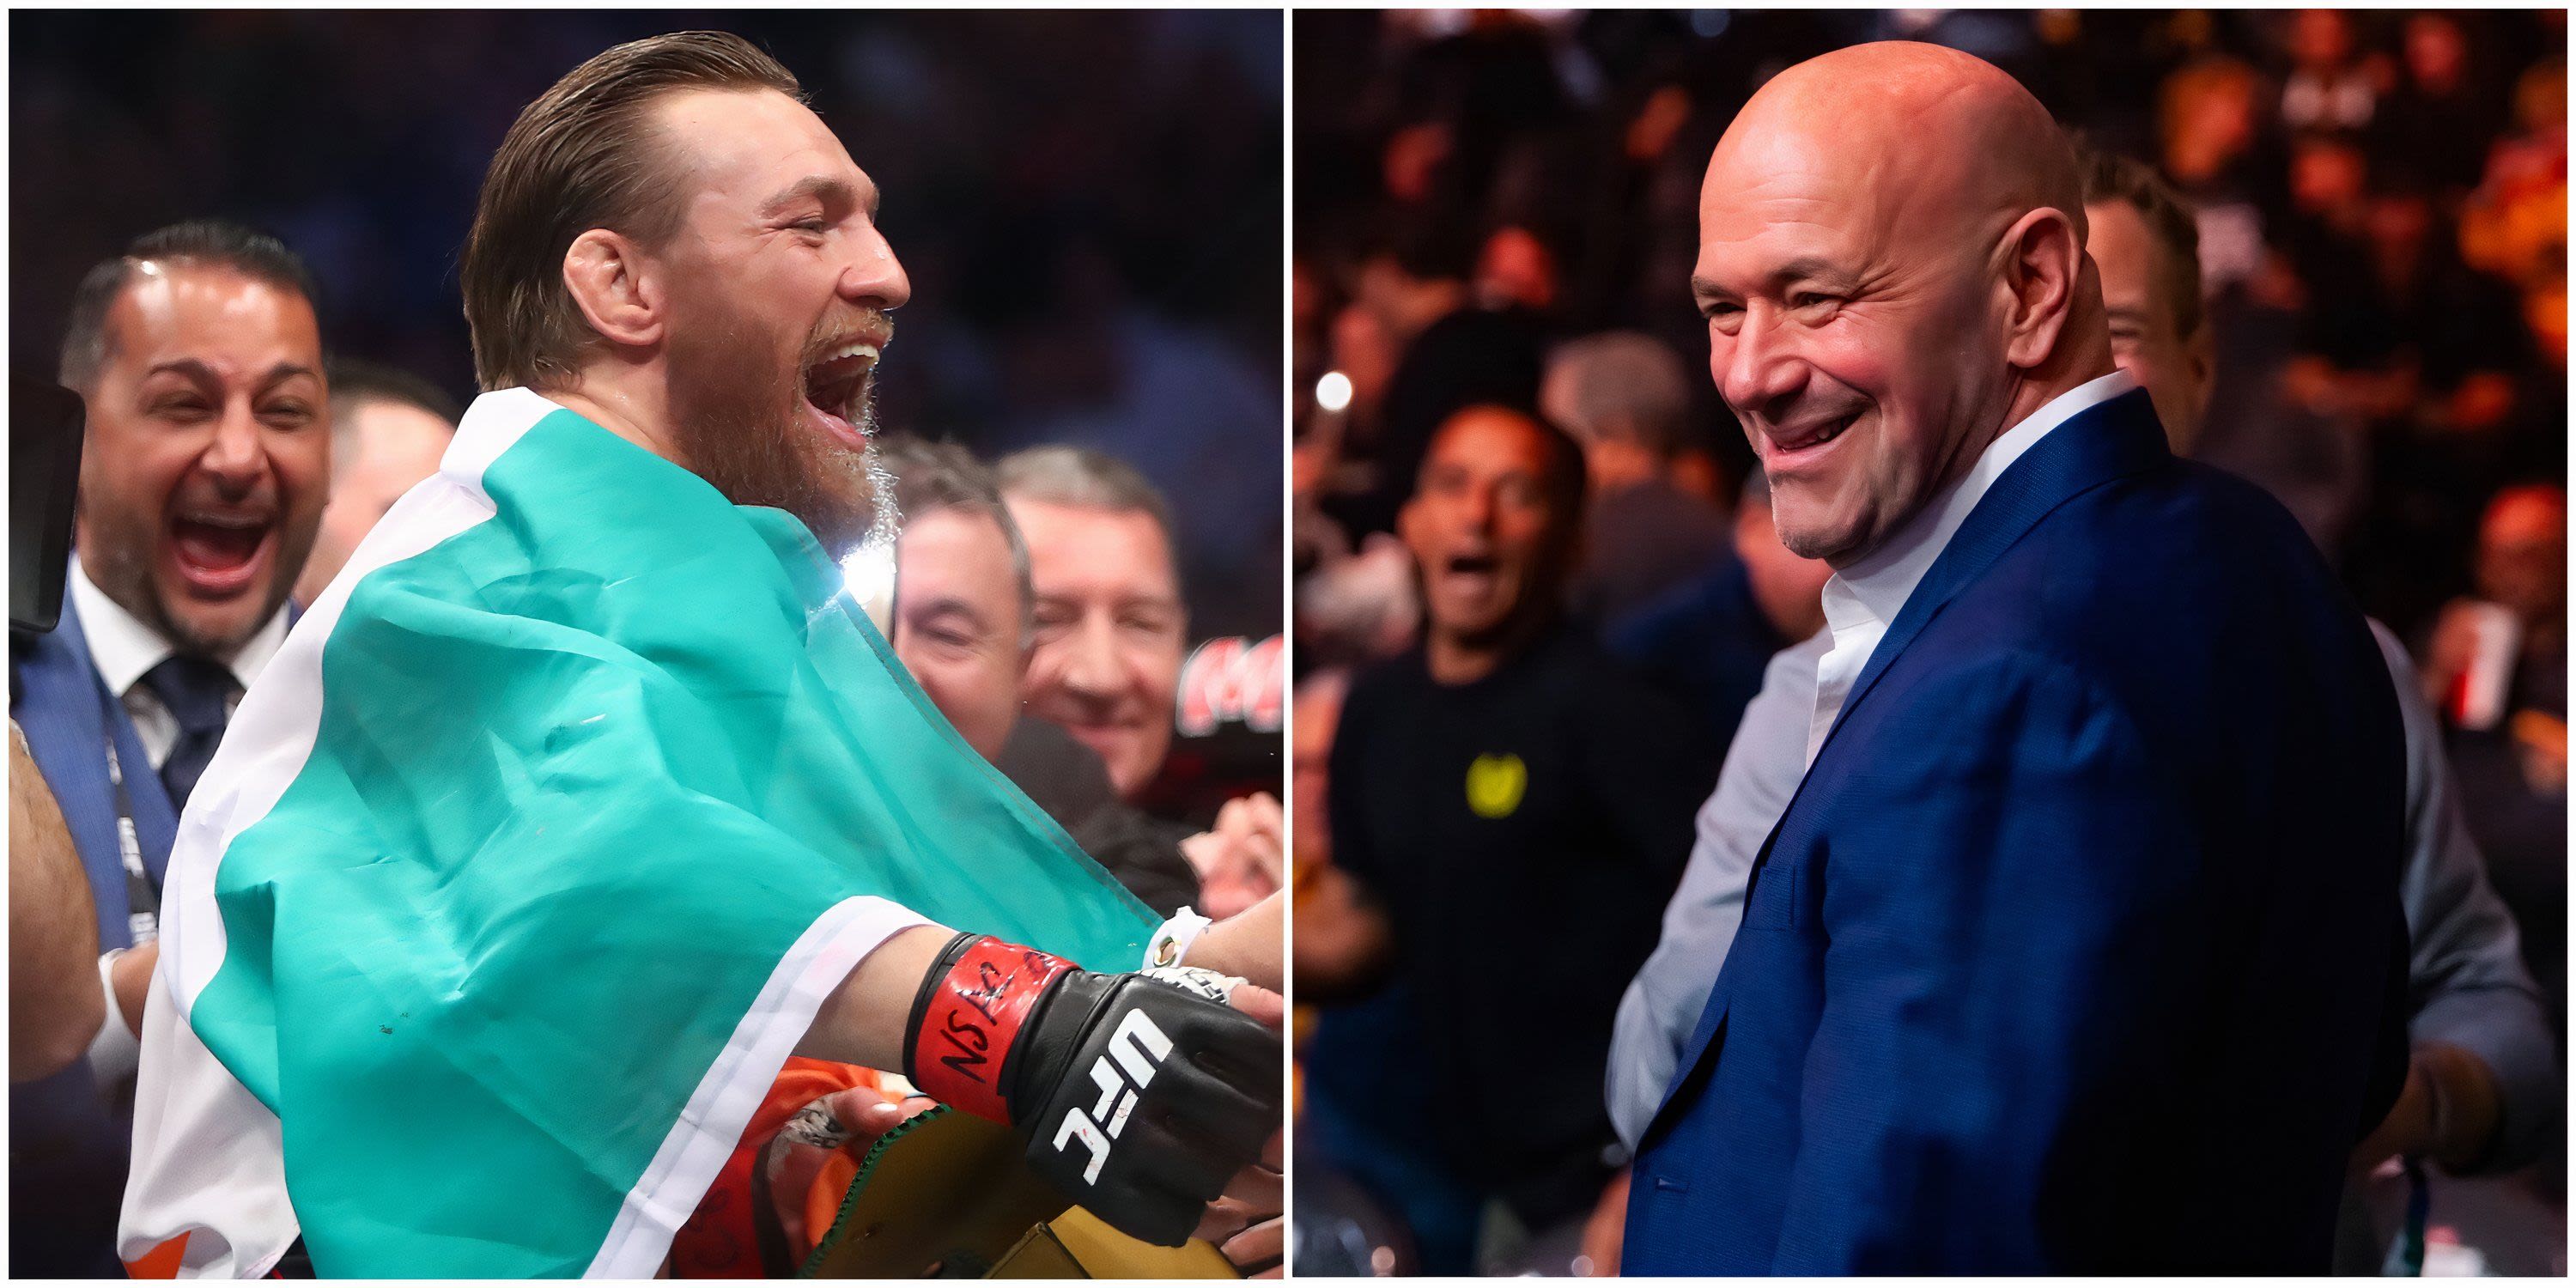 Conor McGregor said he is "in negotiation stage" for a new UFC contract, and shared plans to fight three times this year.